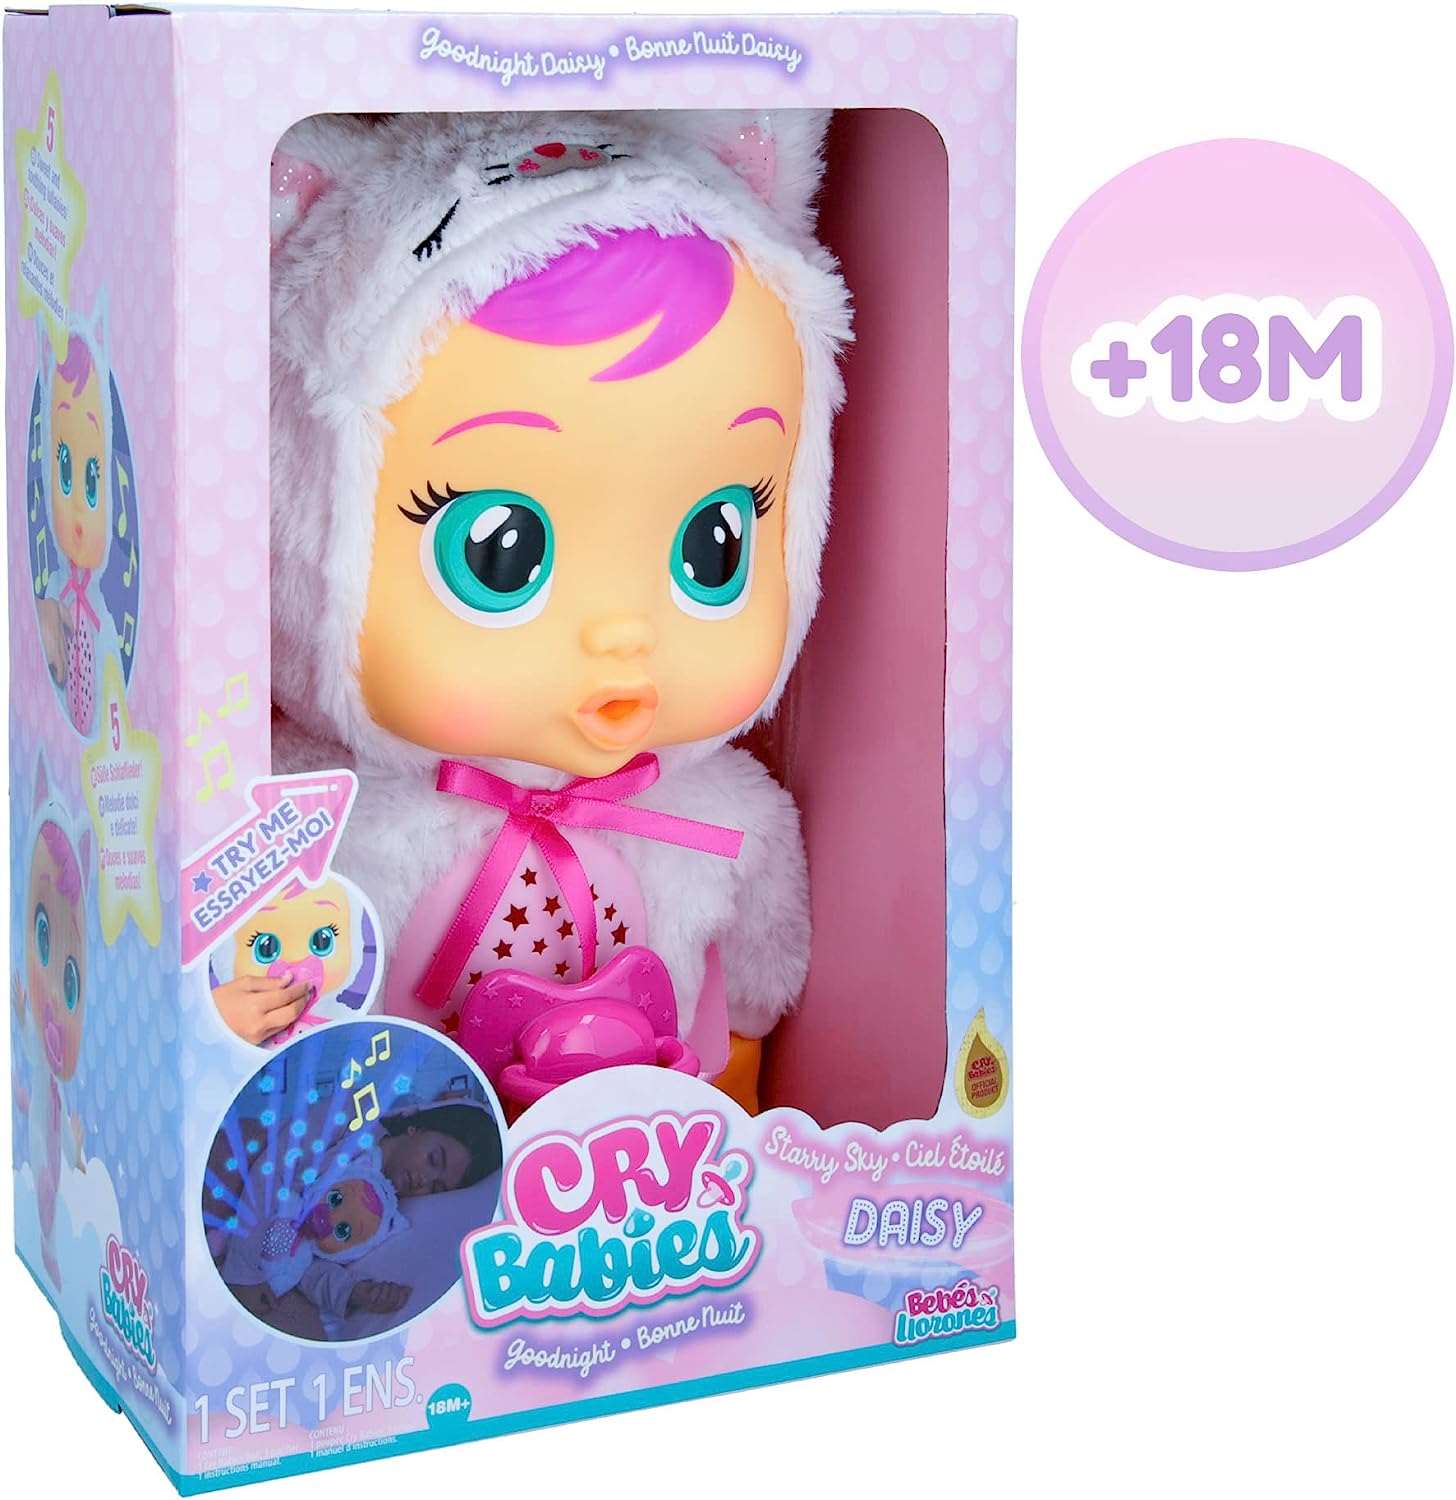 Cry Babies Goodnight Dreamy - Sleepy Time Baby Doll with LED Lights, for  Girls and Boys Ages 18M and up